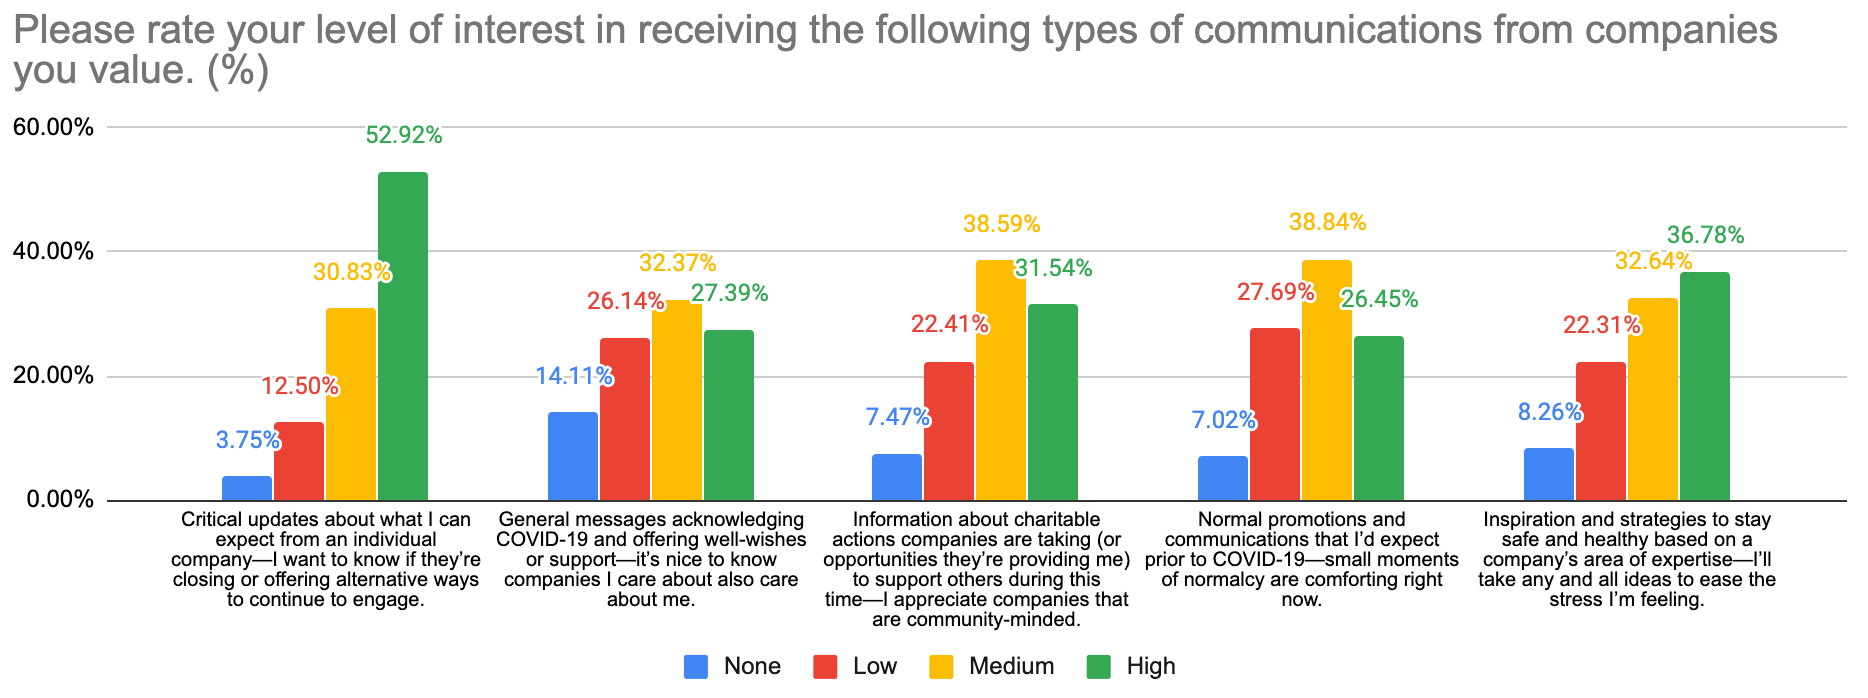 Interest in COVID communication types